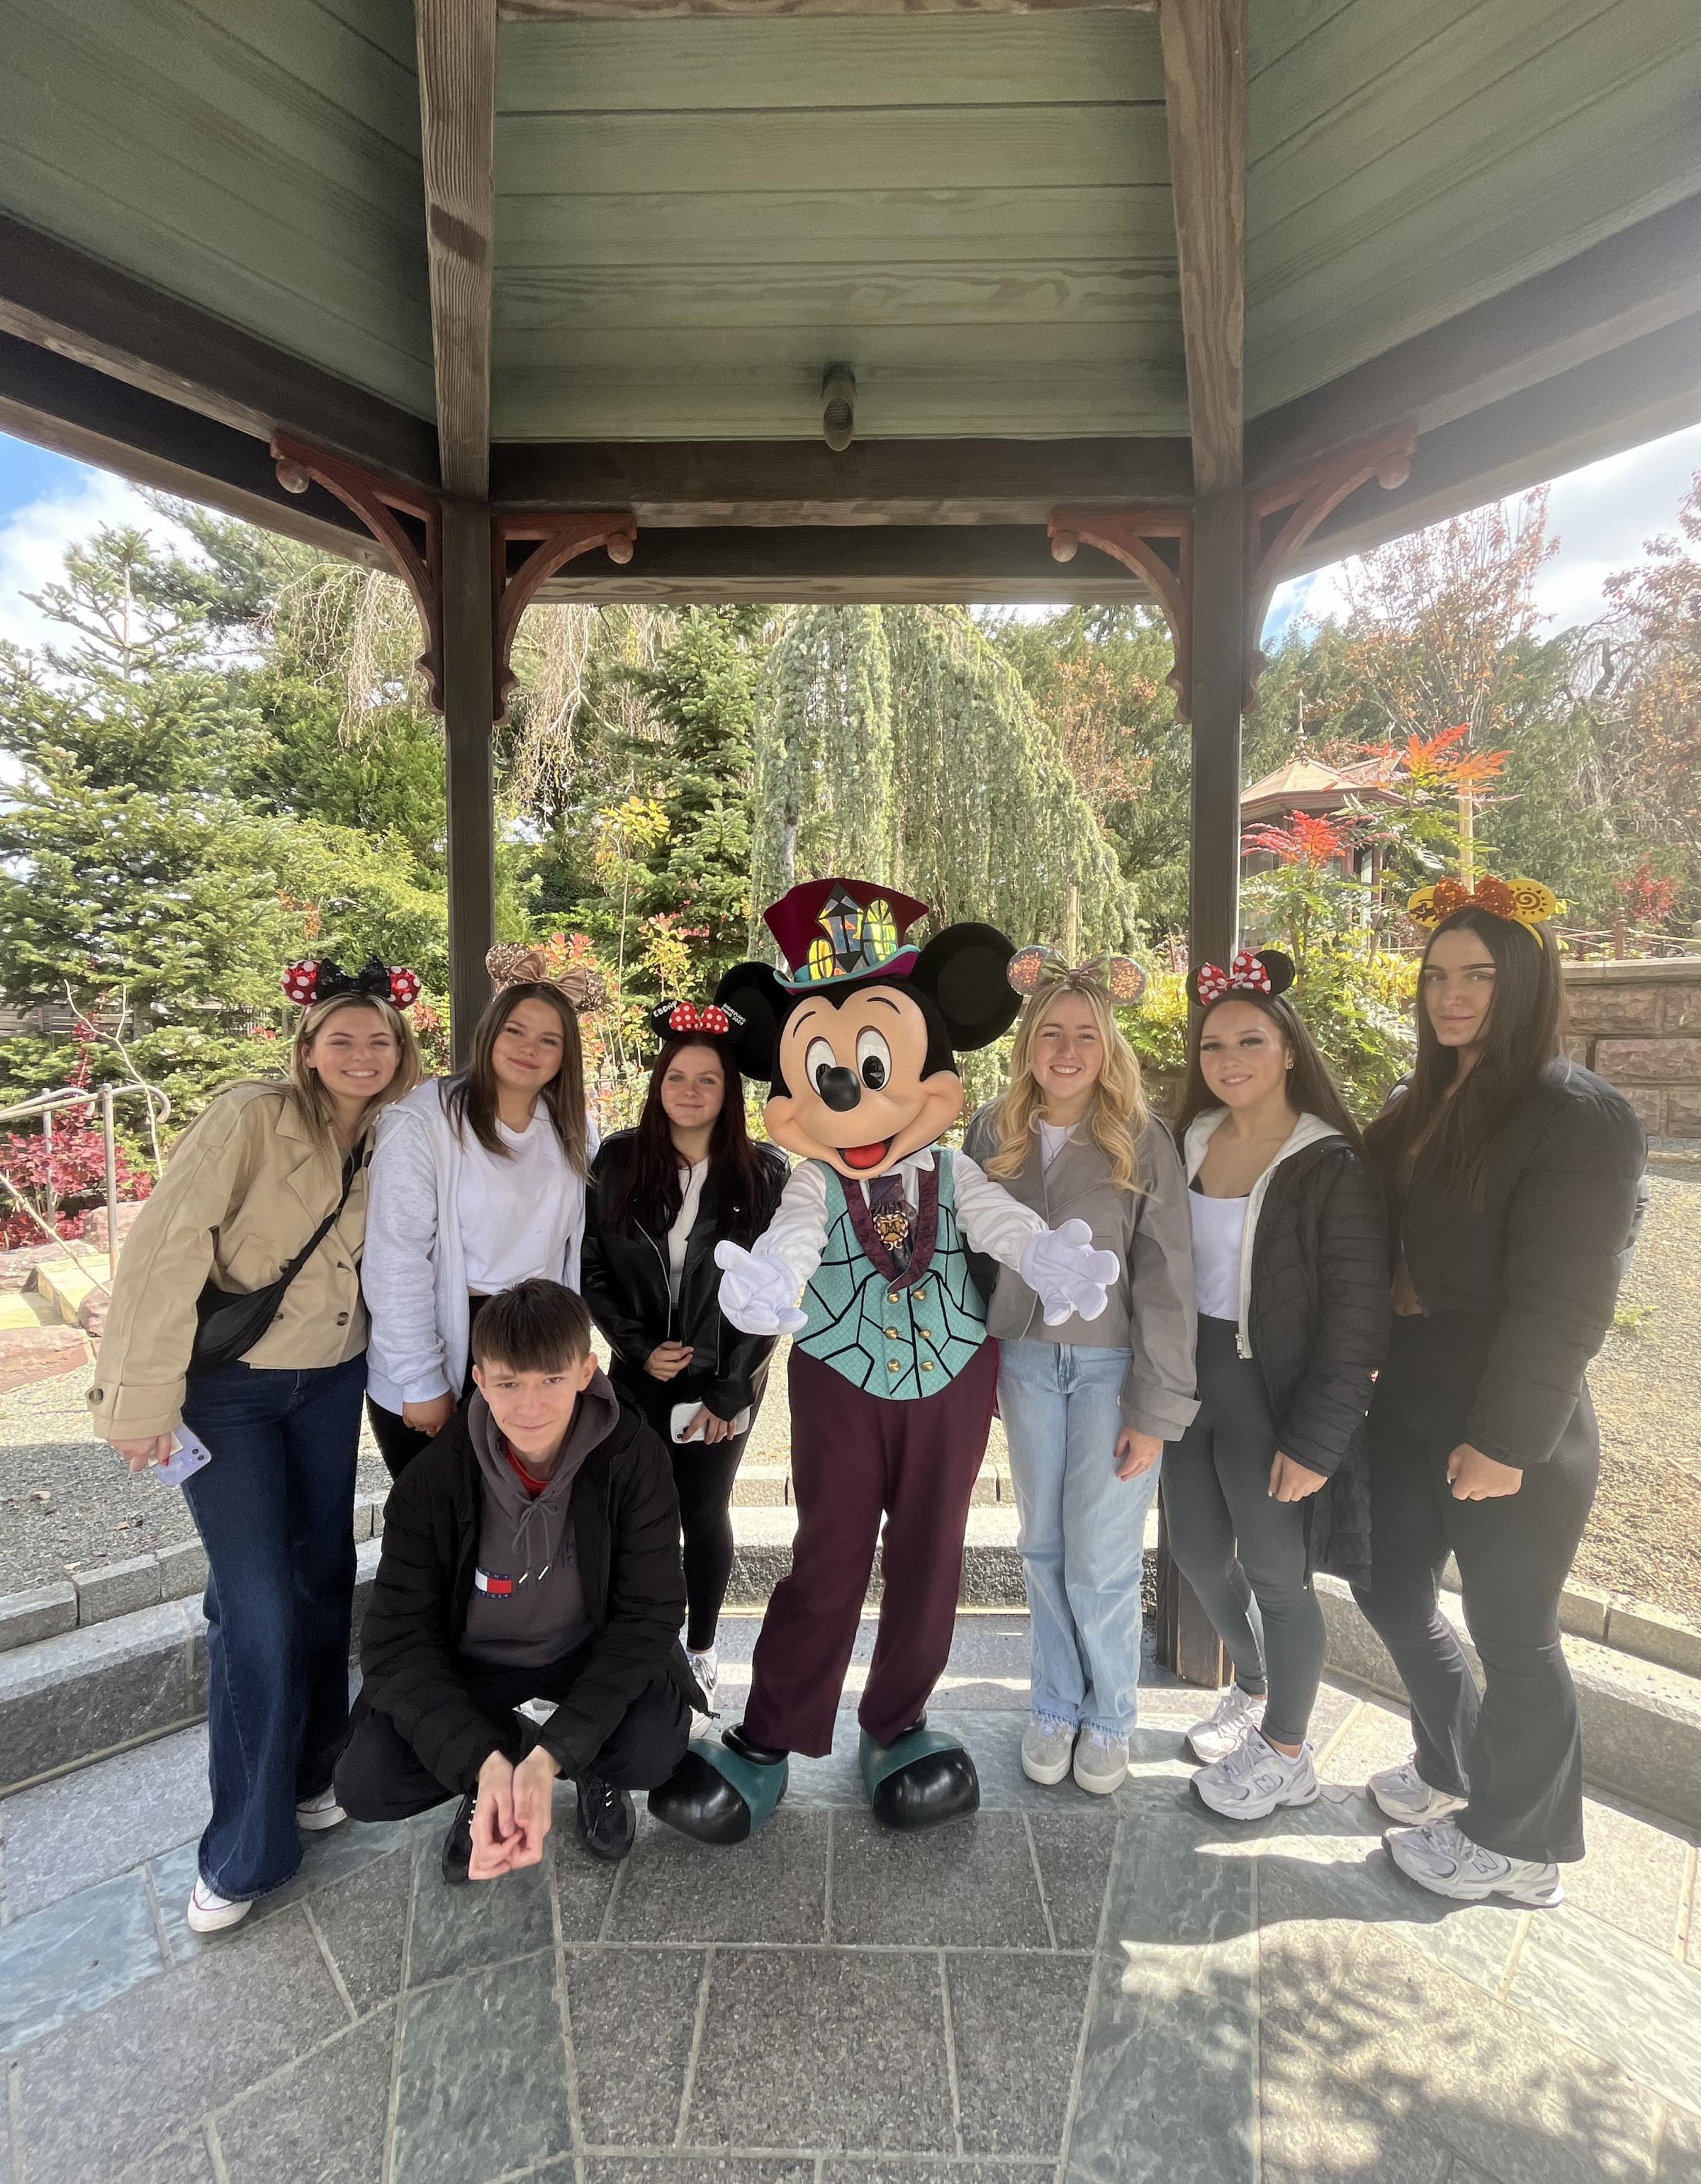 Some of the students with Mickey Mouse.